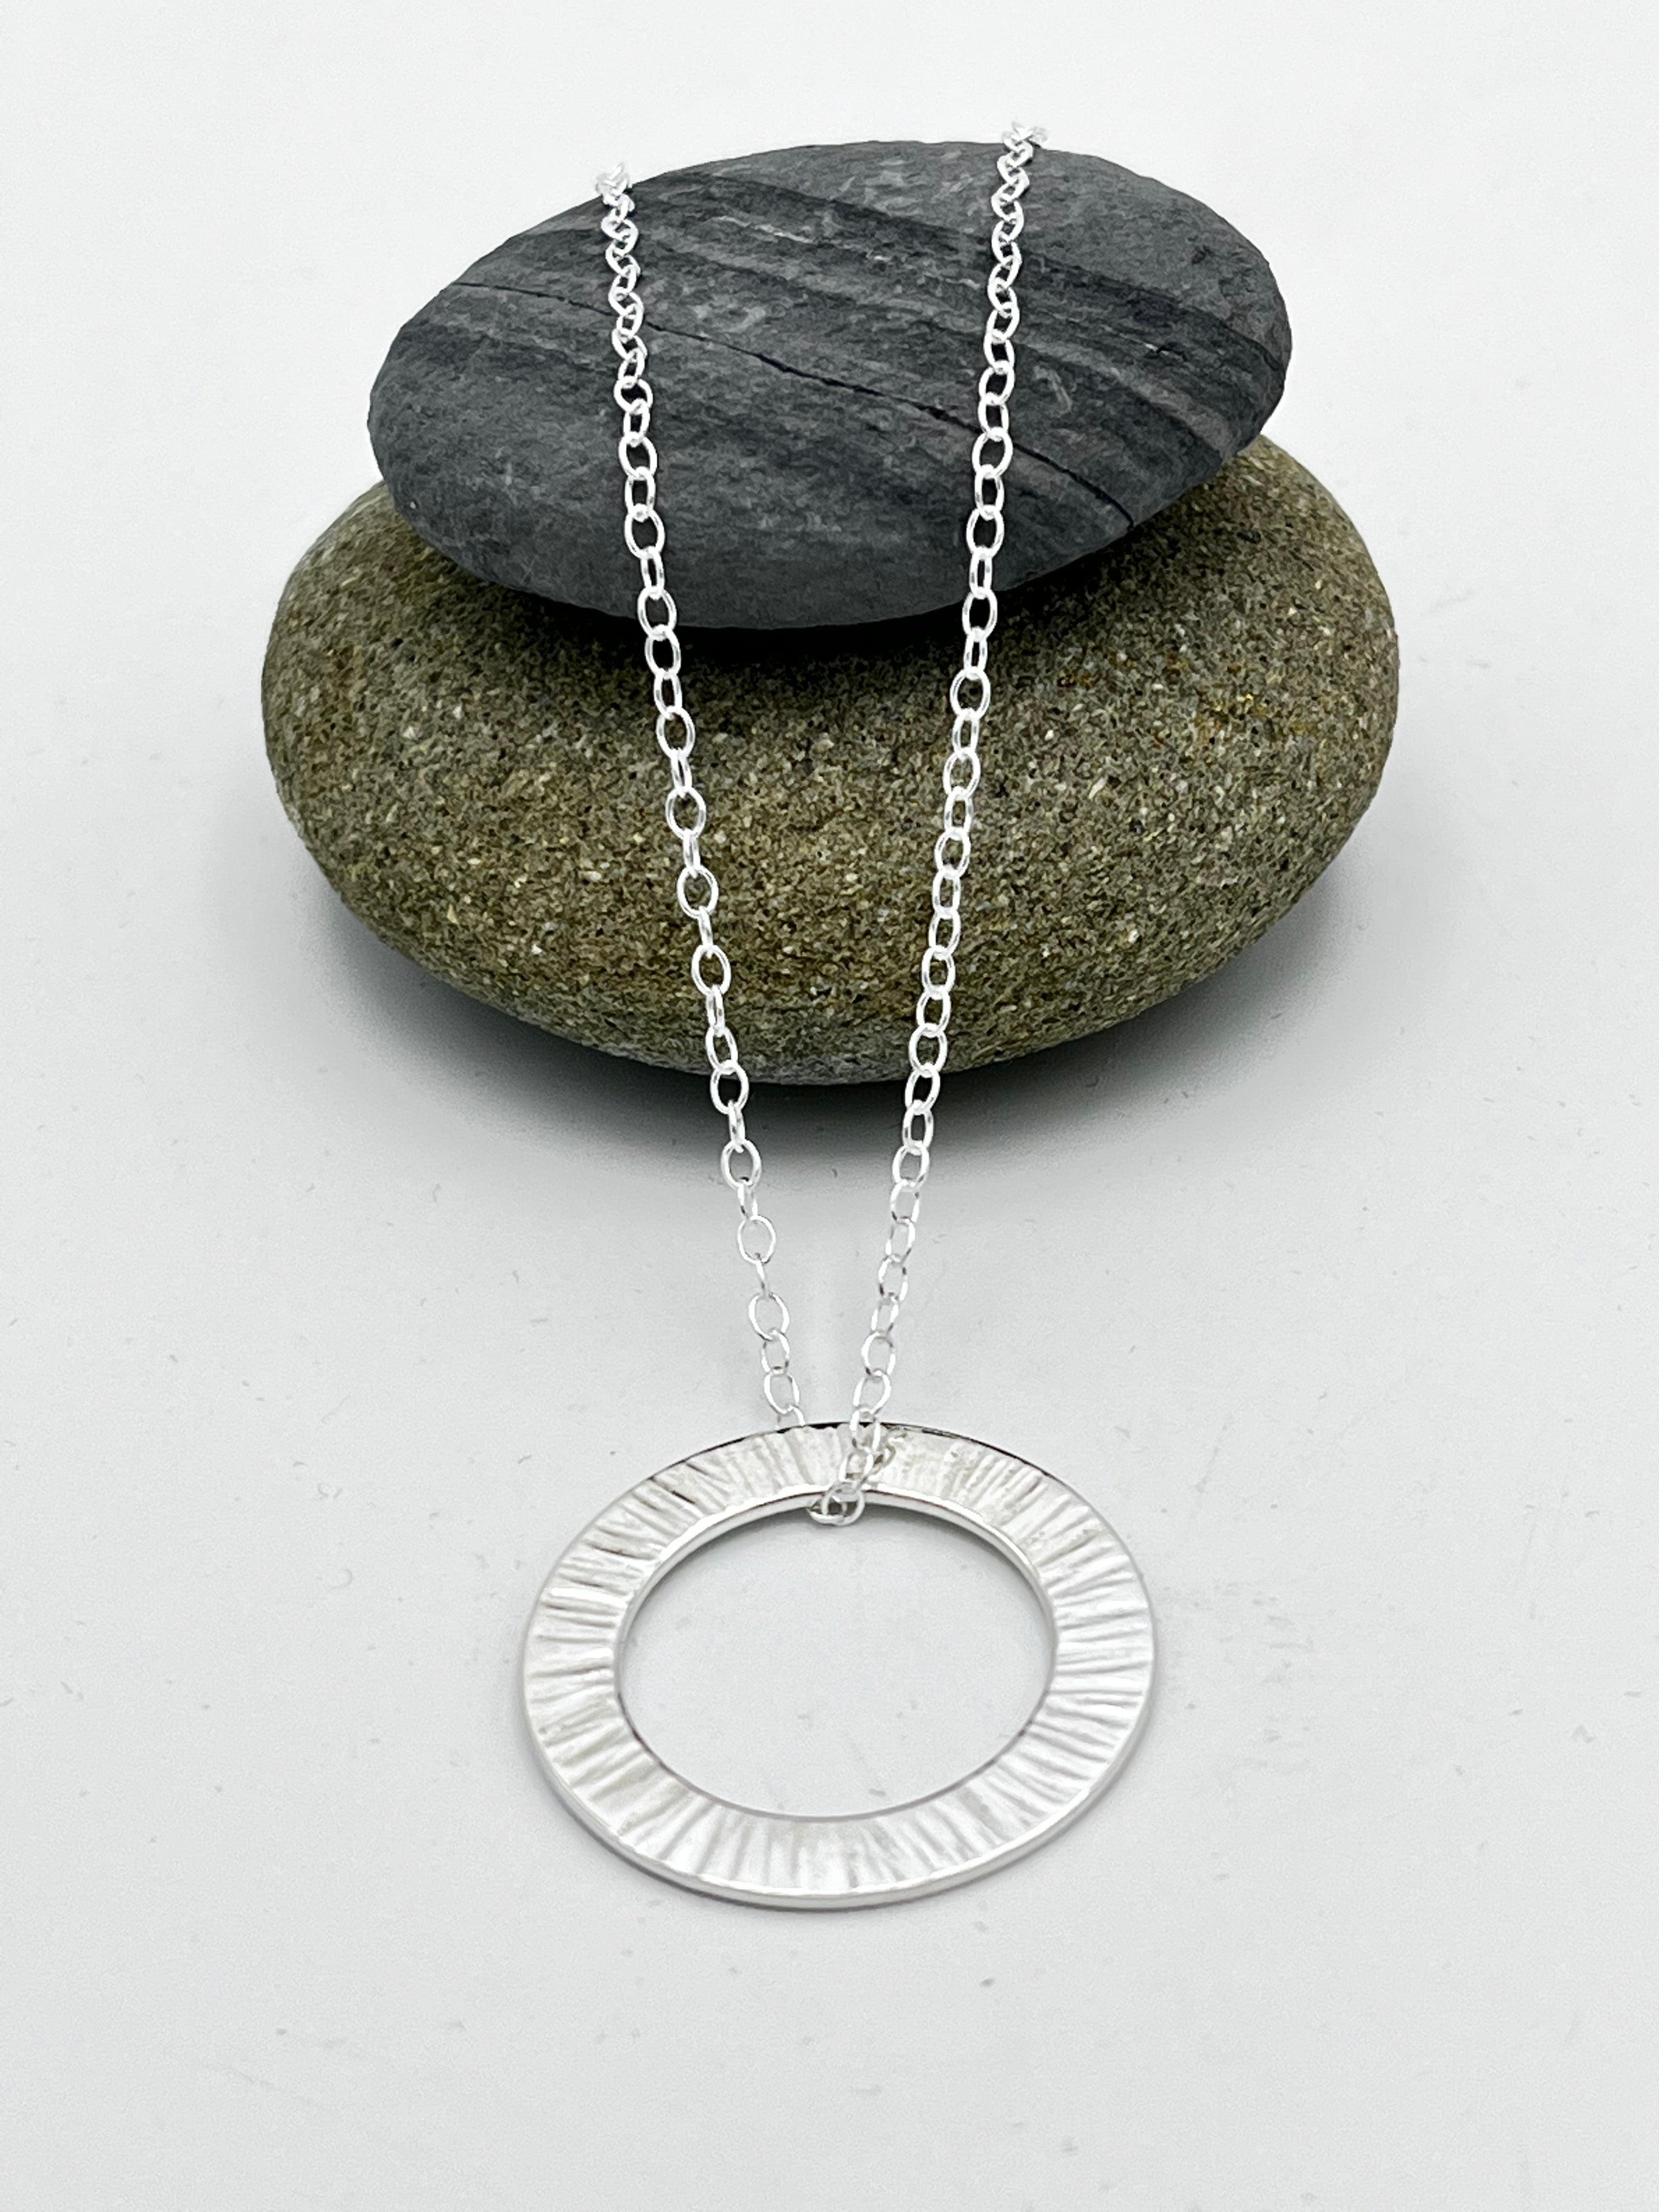 Washer pendant 25mm wide 'Sunset' finish on 16" trace chain